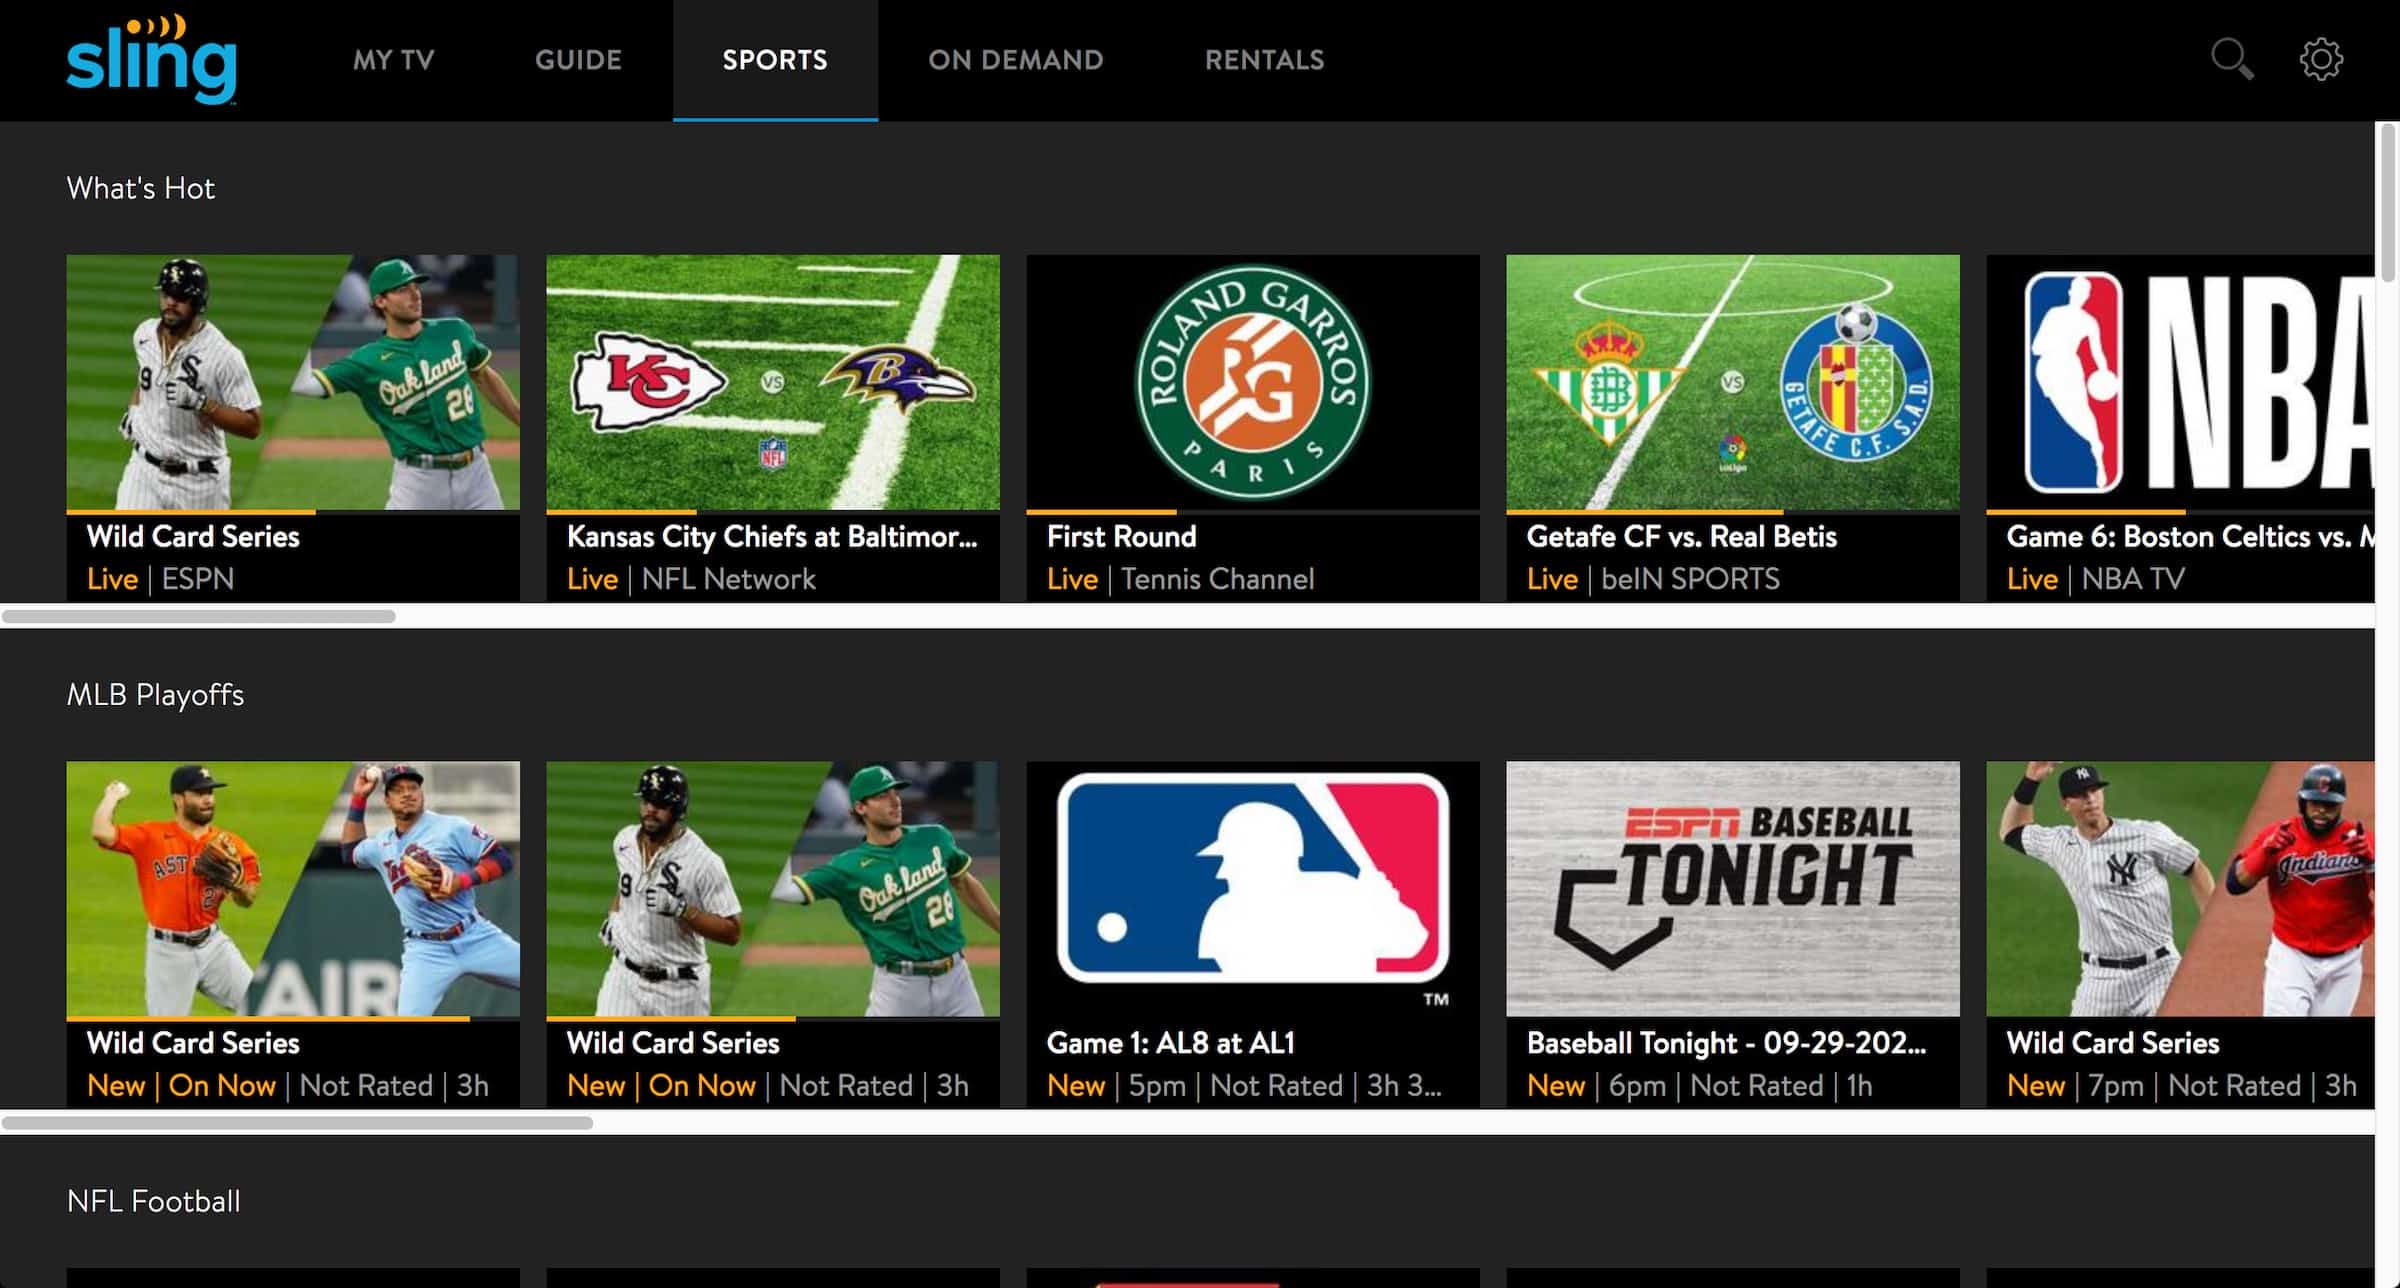 Watching sports on Sling TV